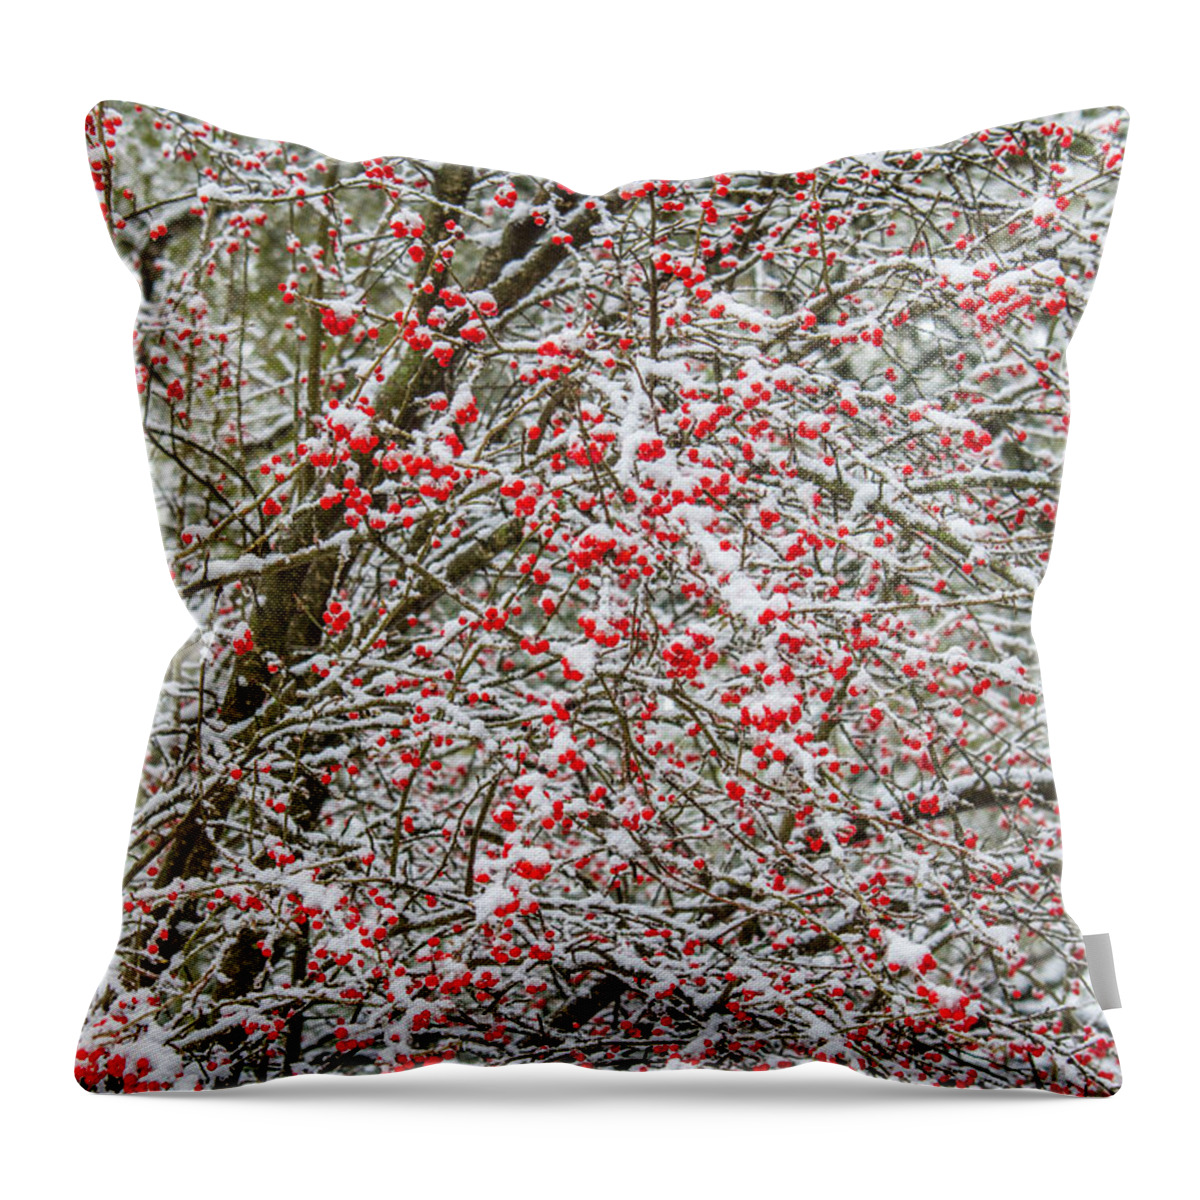 Winterberry Throw Pillow featuring the photograph Winterberry During a Snowfall by Steven Schwartzman